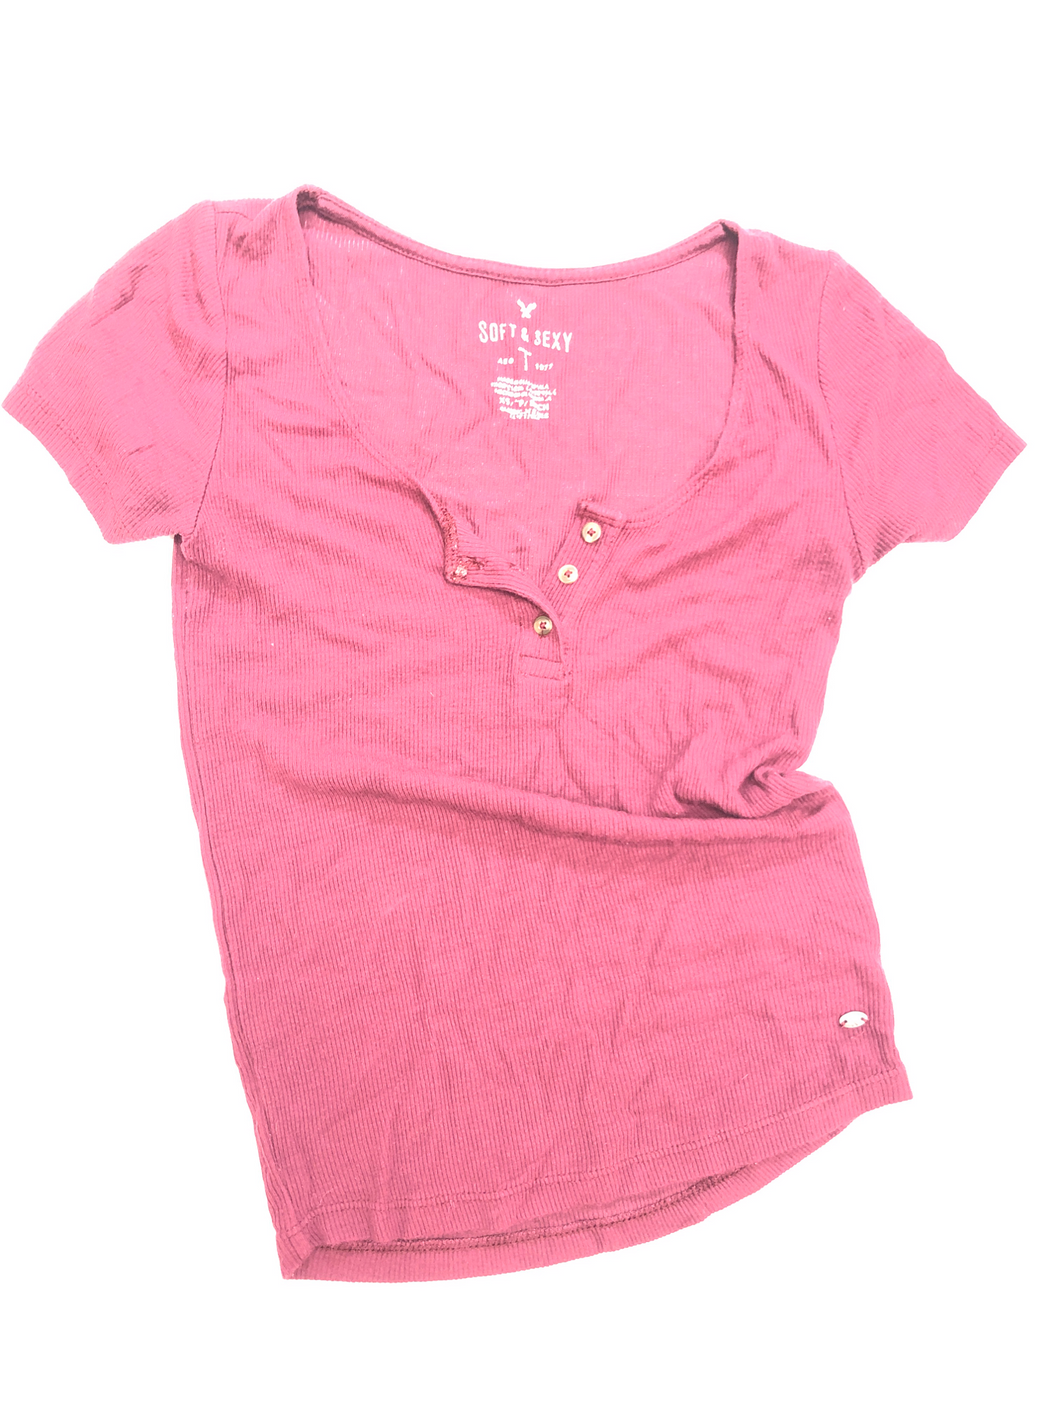 American Eagle Short Sleeve Top Size Extra Small